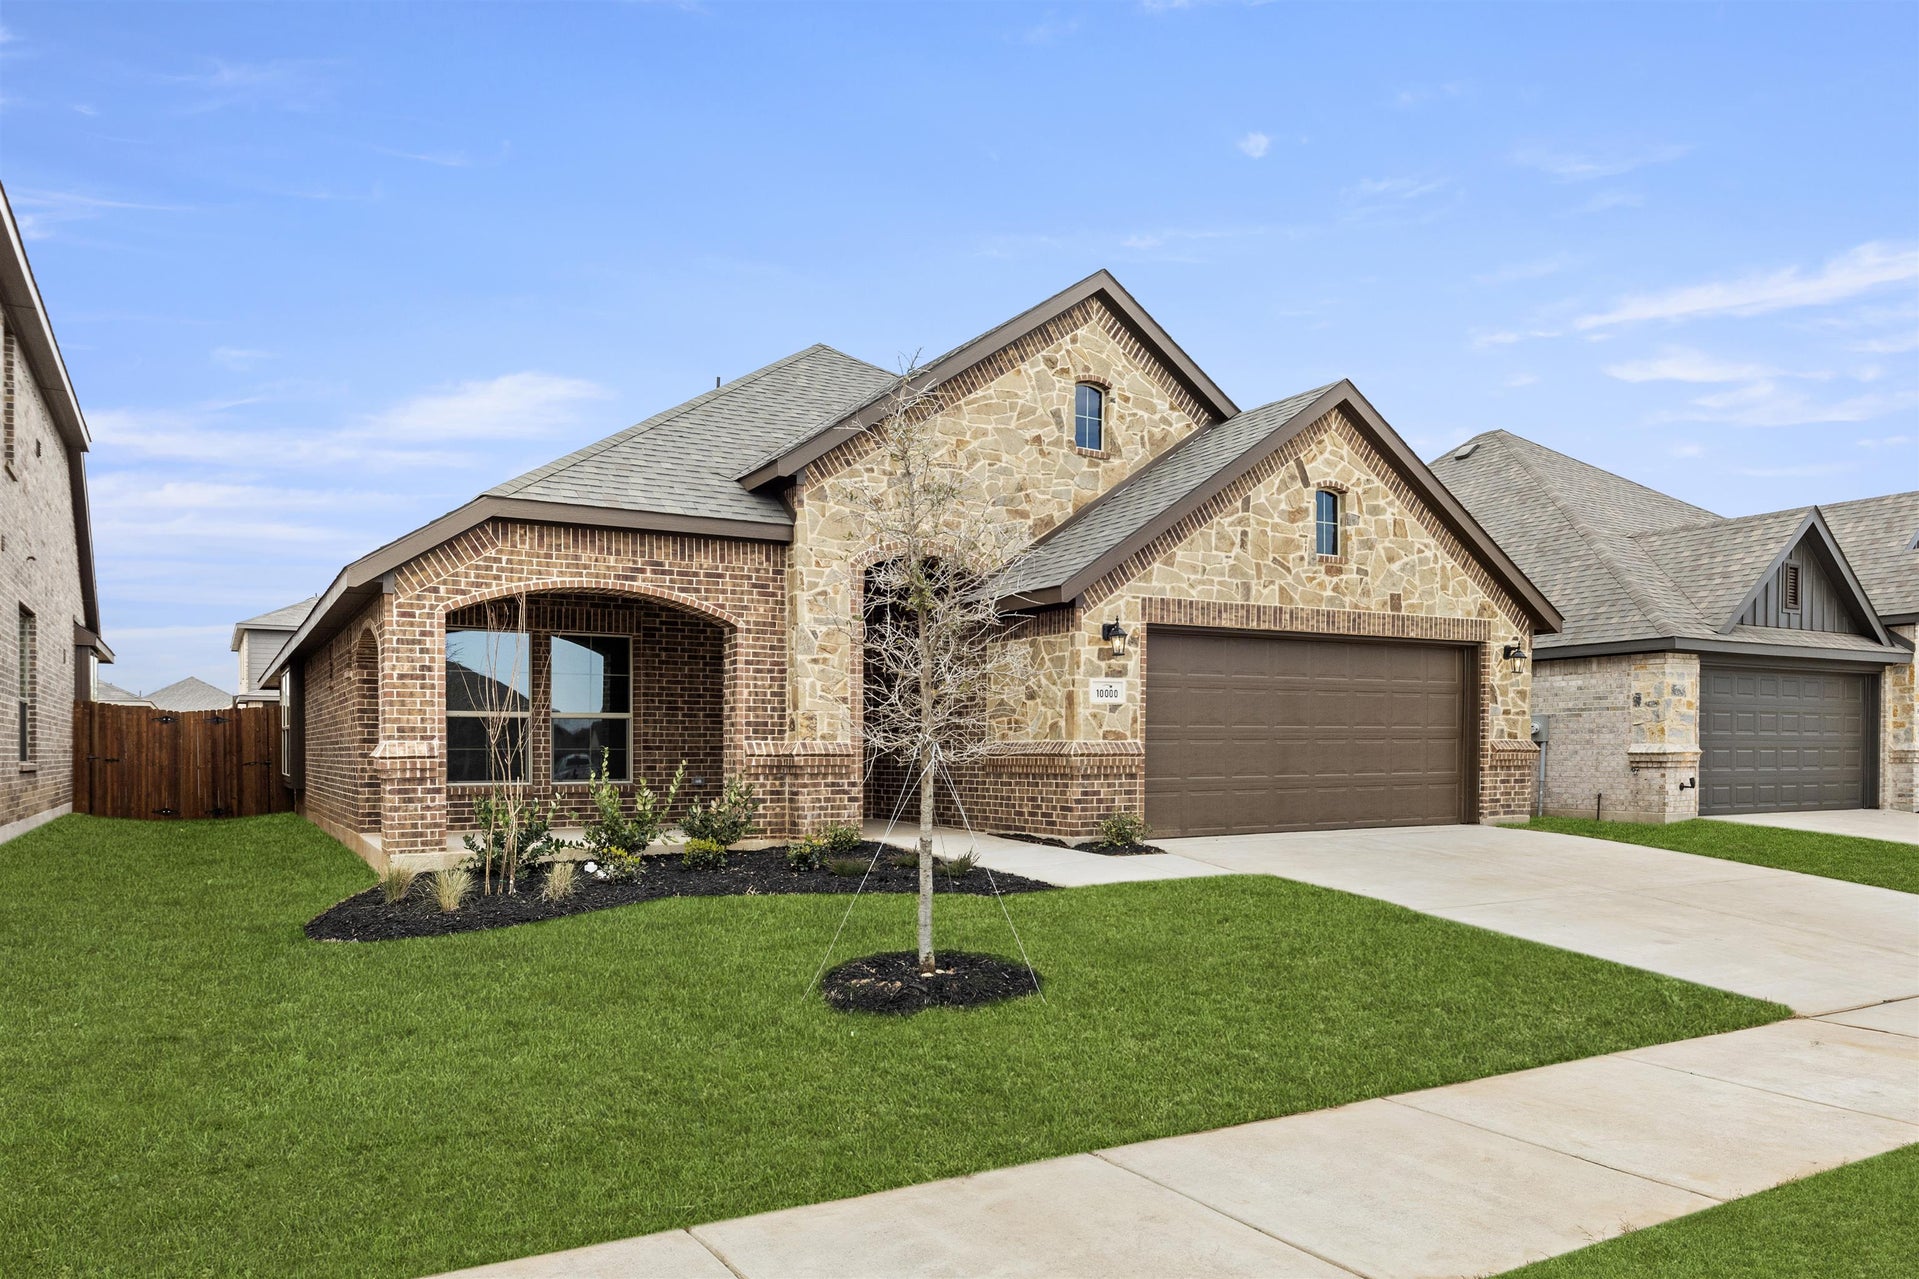 1,868sf New Home in Fort Worth, TX